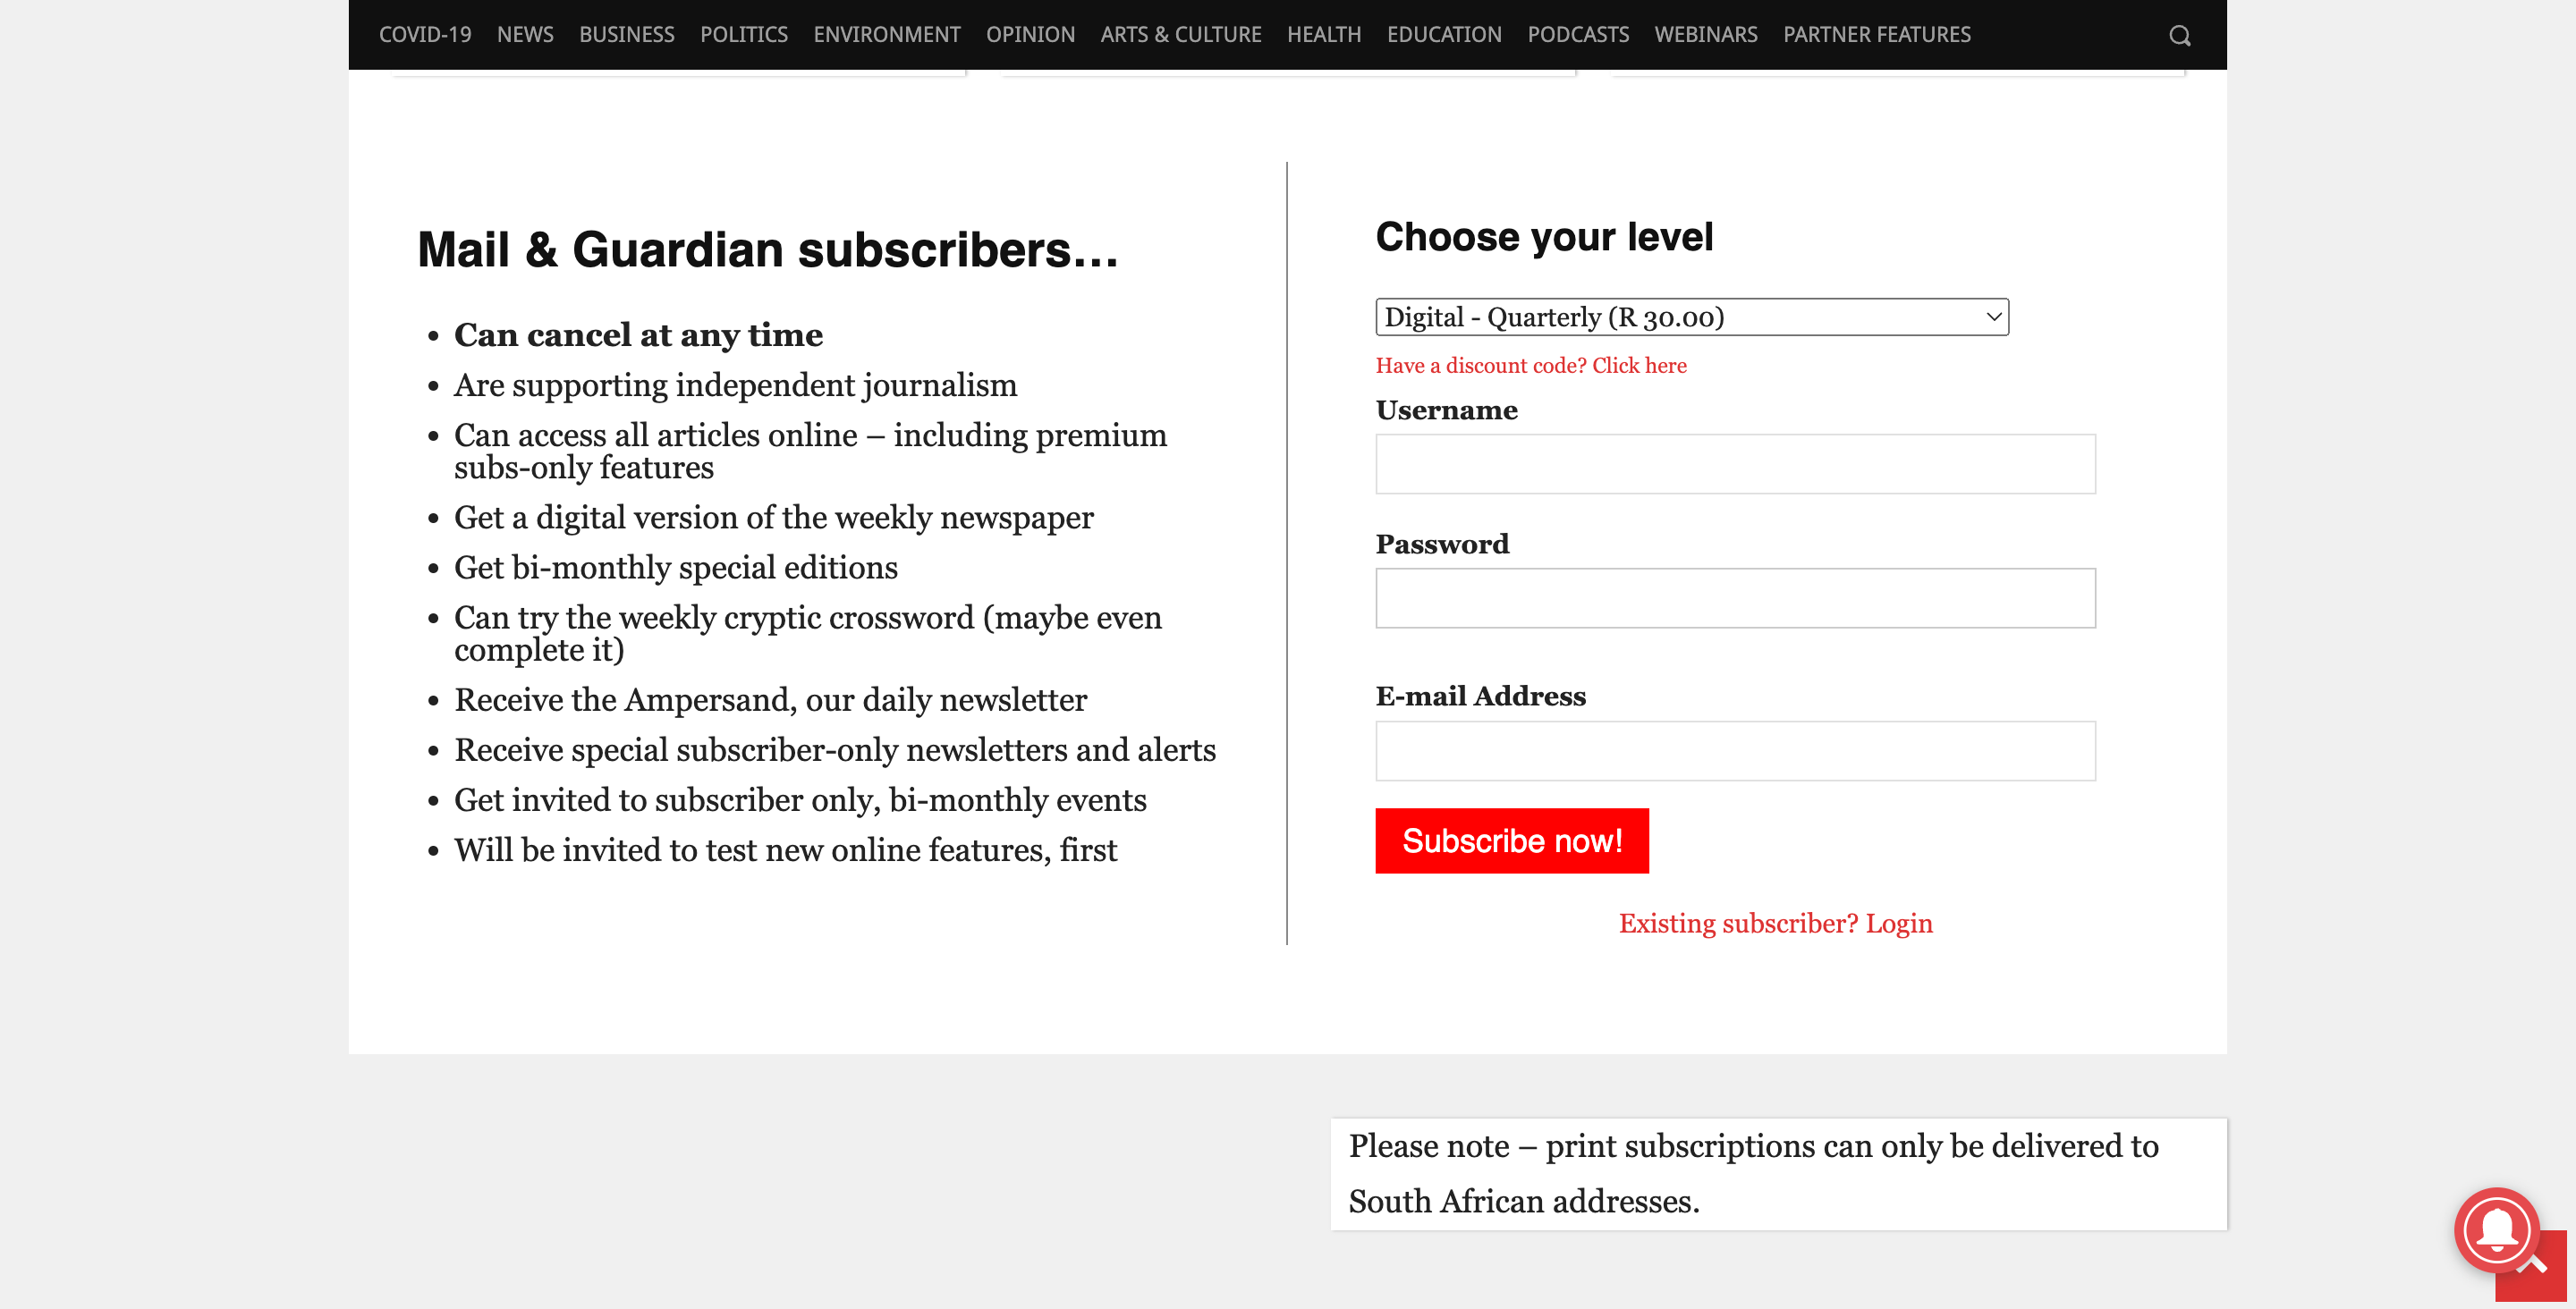 The Mail & Guardian Membership Checkout